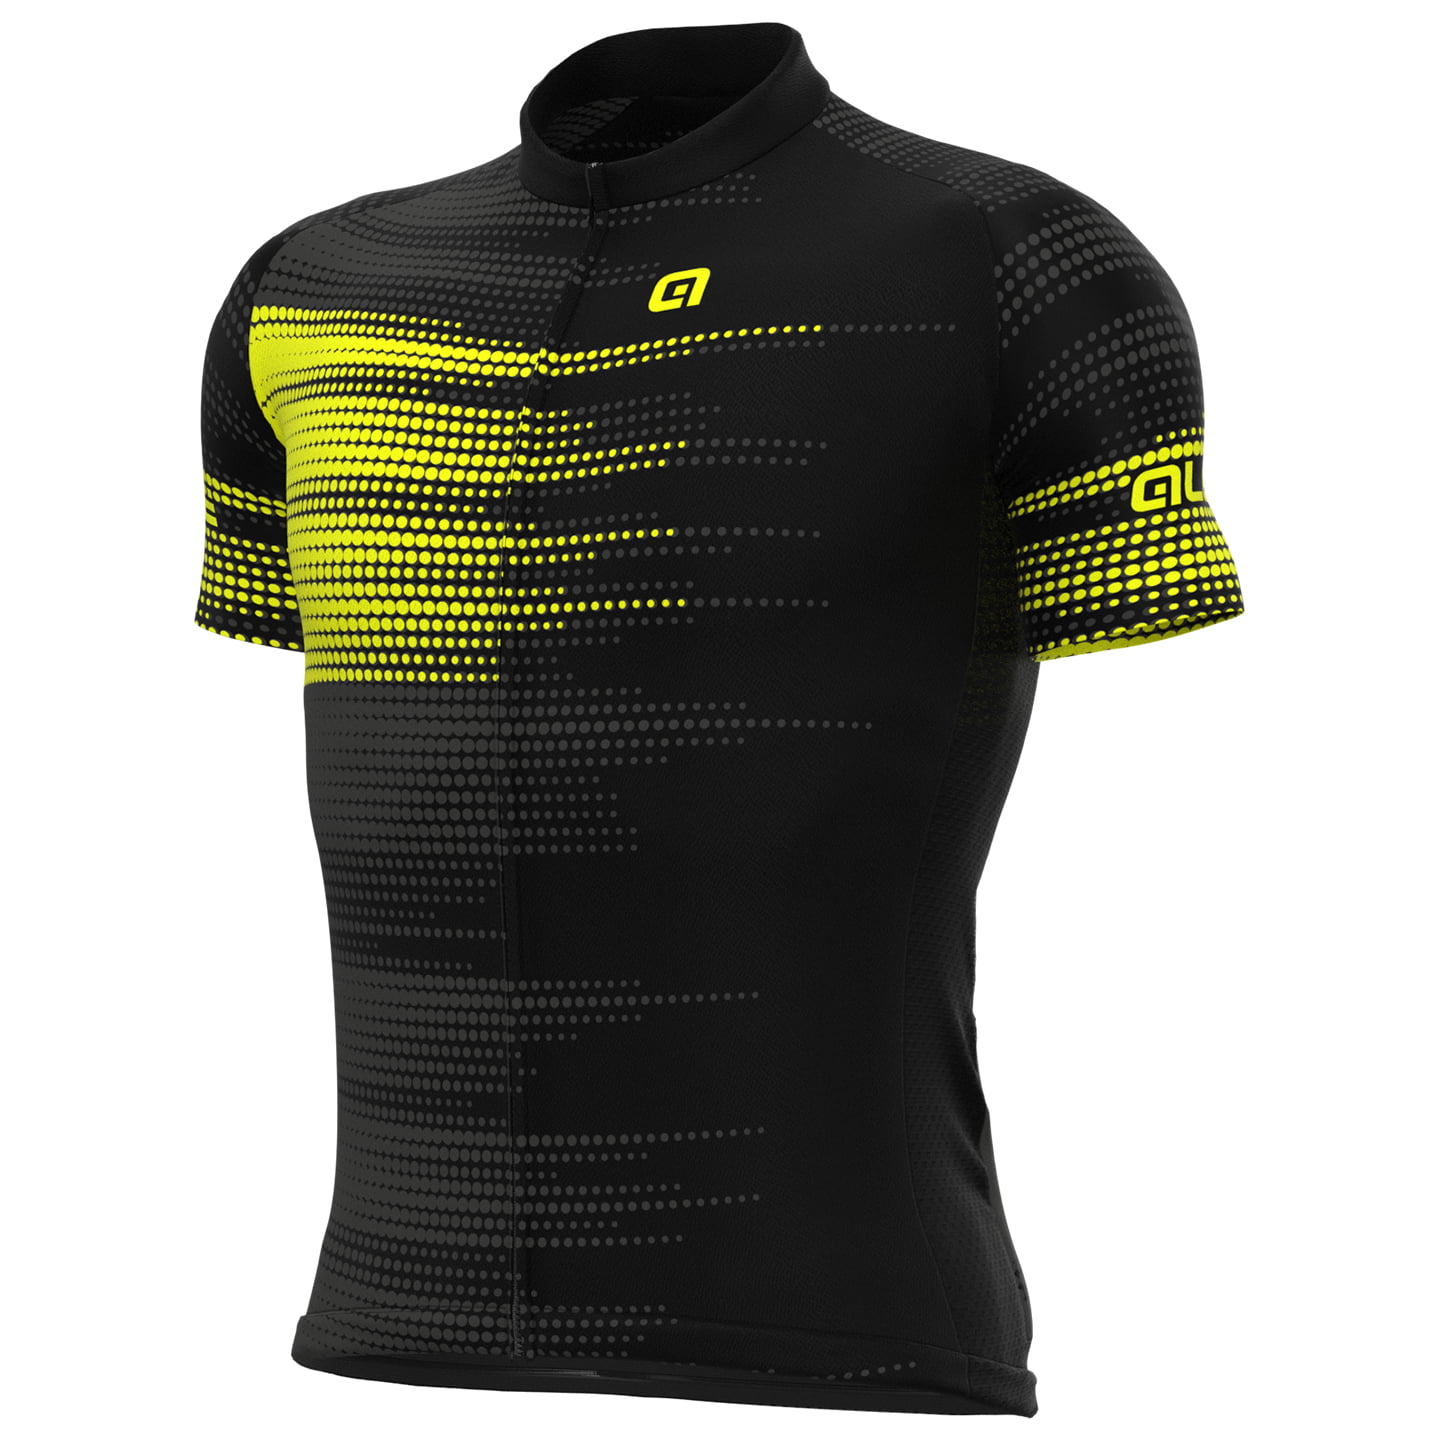 ALE Turbo Short Sleeve Jersey Short Sleeve Jersey, for men, size 2XL, Cycling jersey, Cycle clothing